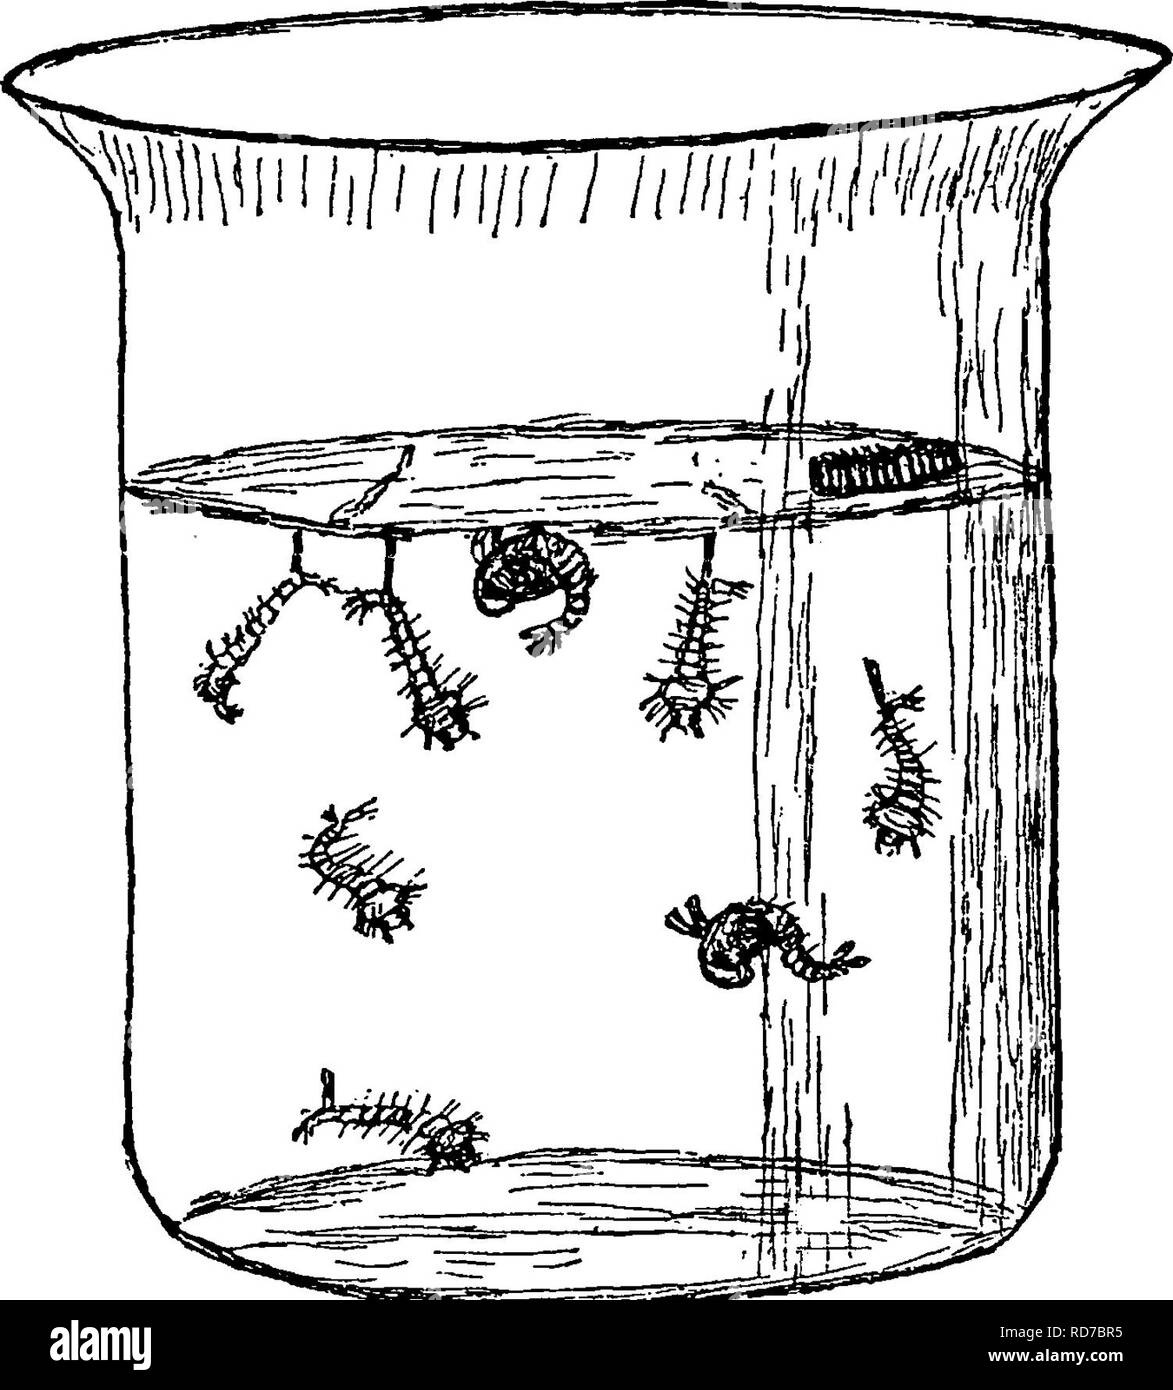 . A manual for the study of insects. Insects. 438 THE STUDY OF INSECTS, pools of Stagnant water, in watering-troughs, and in ex- posed receptacles of rain-water. The long, slender eggs are laid side by side in a boat- shaped mass, on the surface of the water (Fig. 513). They. Fig. 513.—A glass of water containinsf eg-gs, larvae, and pupae of mosquitoes. hatch in a few days, and the larvae escape from the lower ends into the water. The larvae are well known, and are commonly called *^ wigglers,'' a name suggested by their wriggling motion as they swim through the water. The larva (Fig. 514, a)  Stock Photo